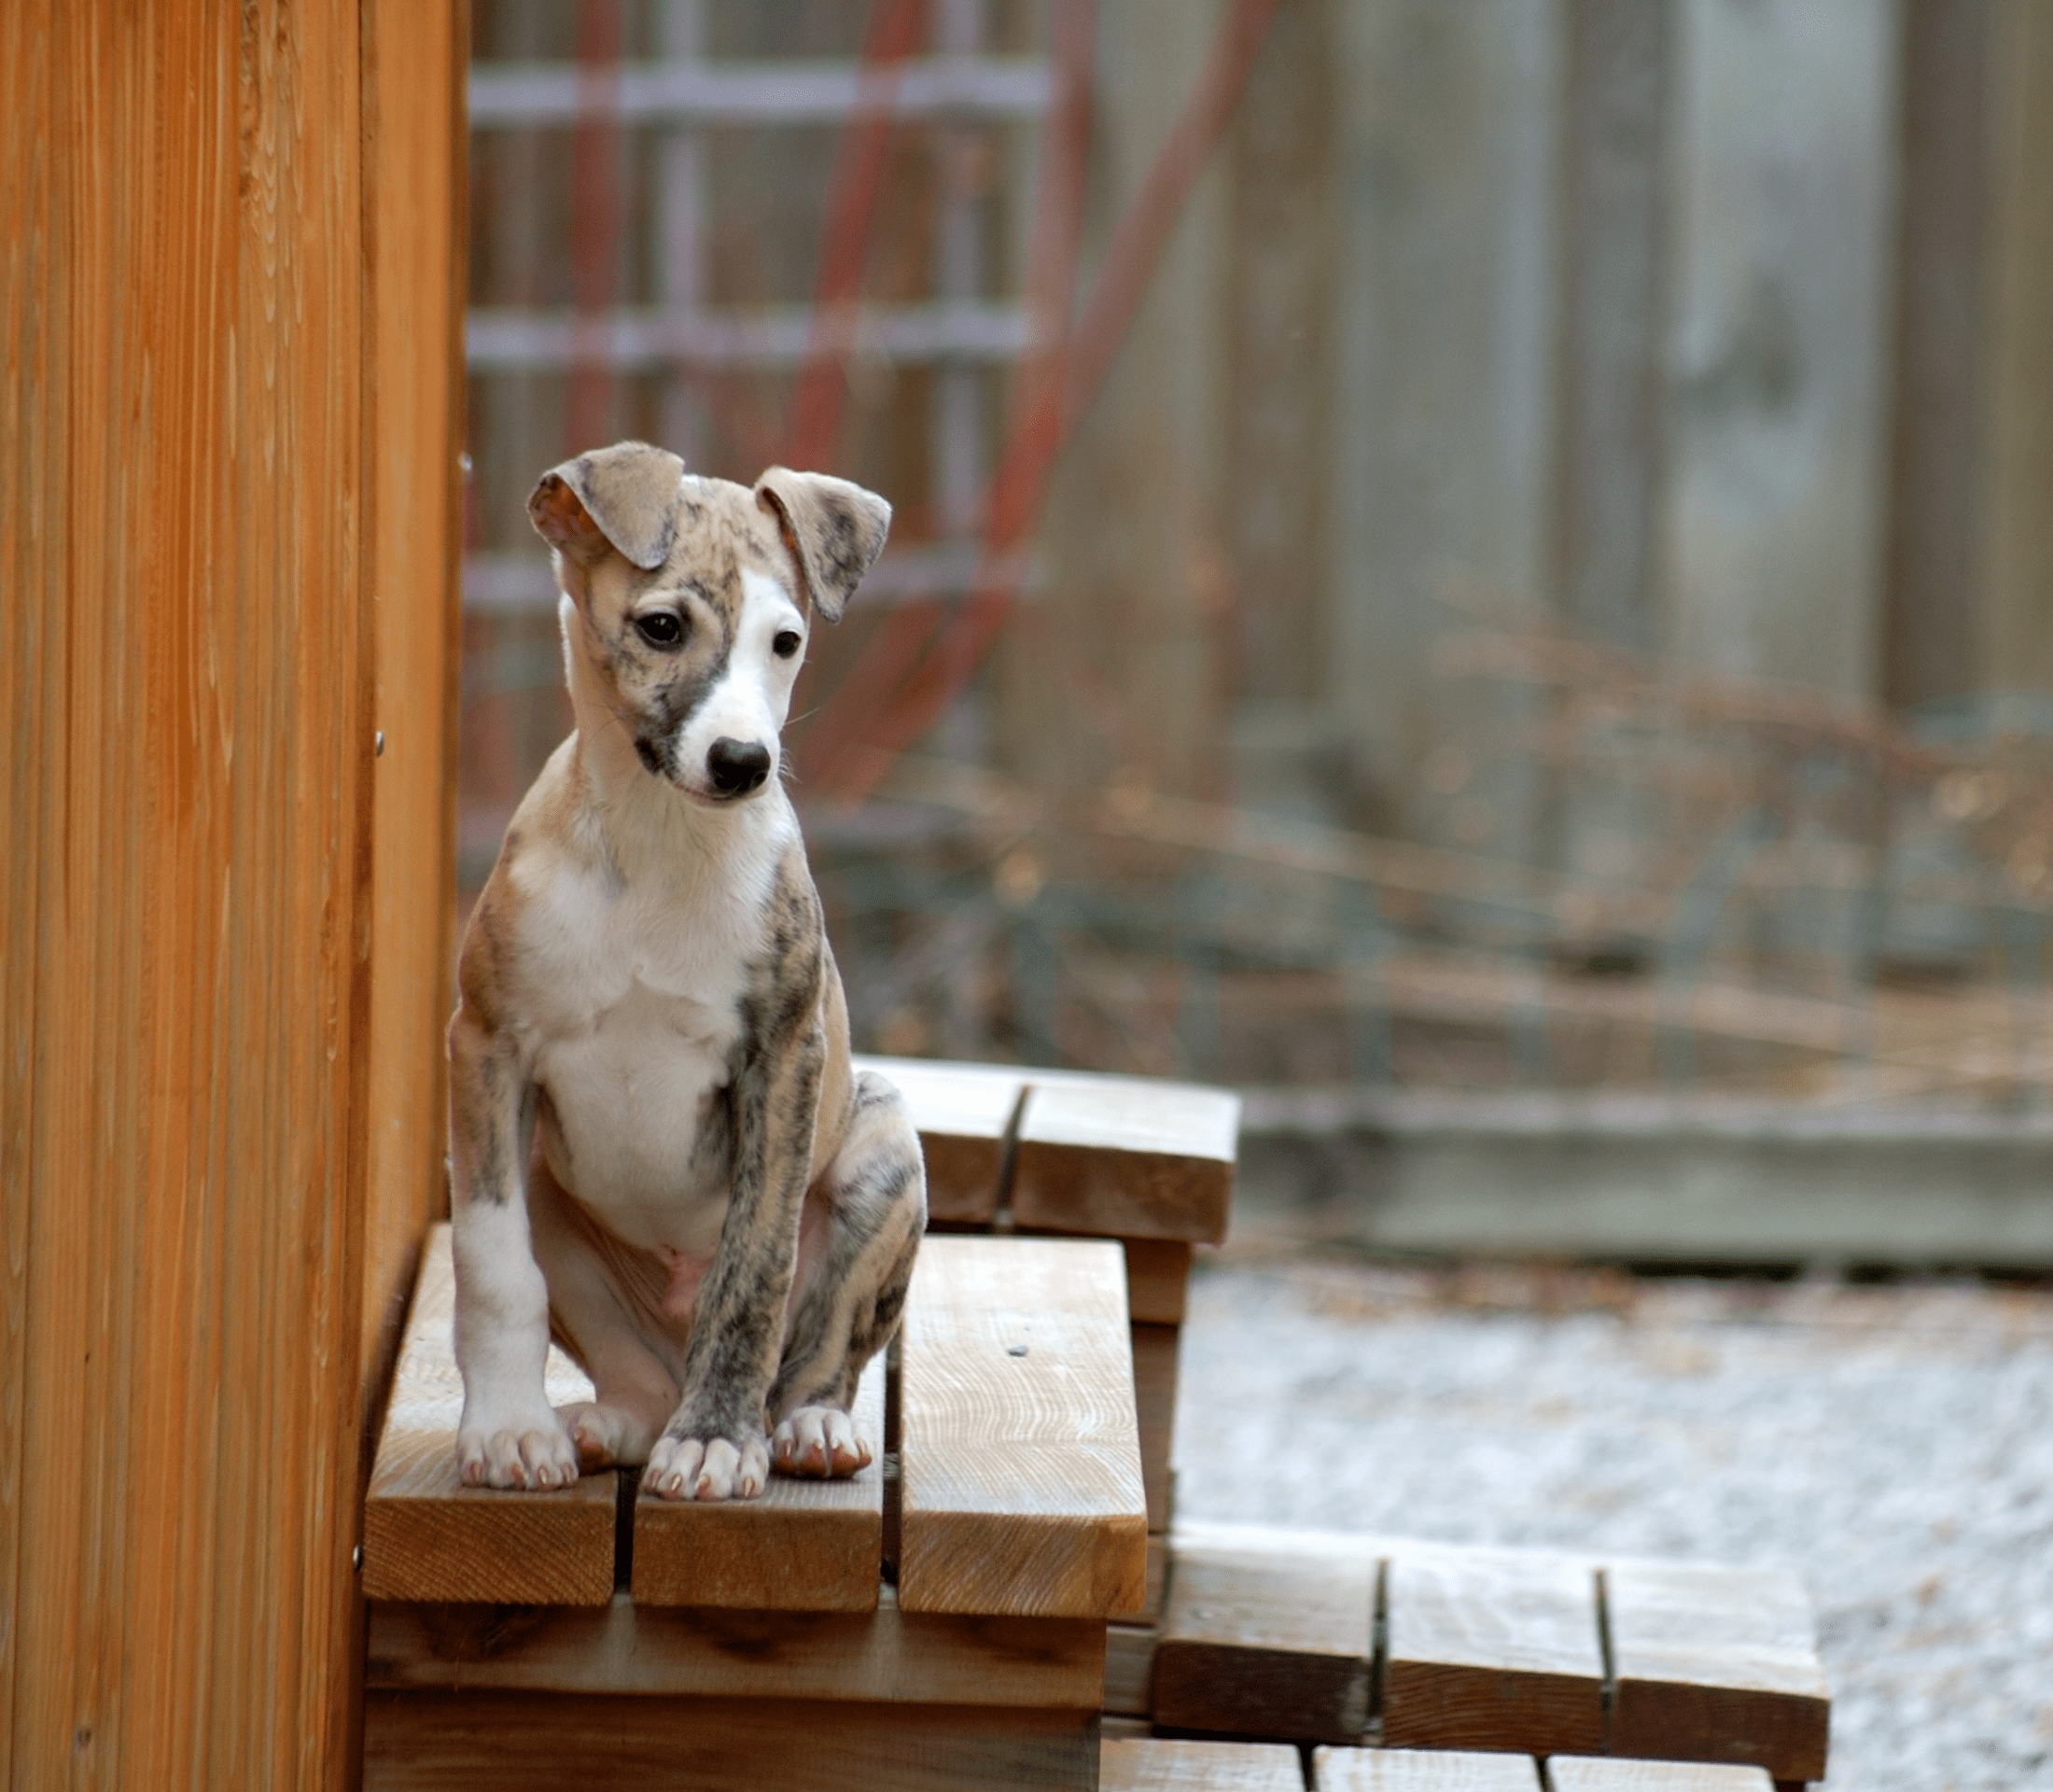 Whippet dog sitting on a wooden furniture